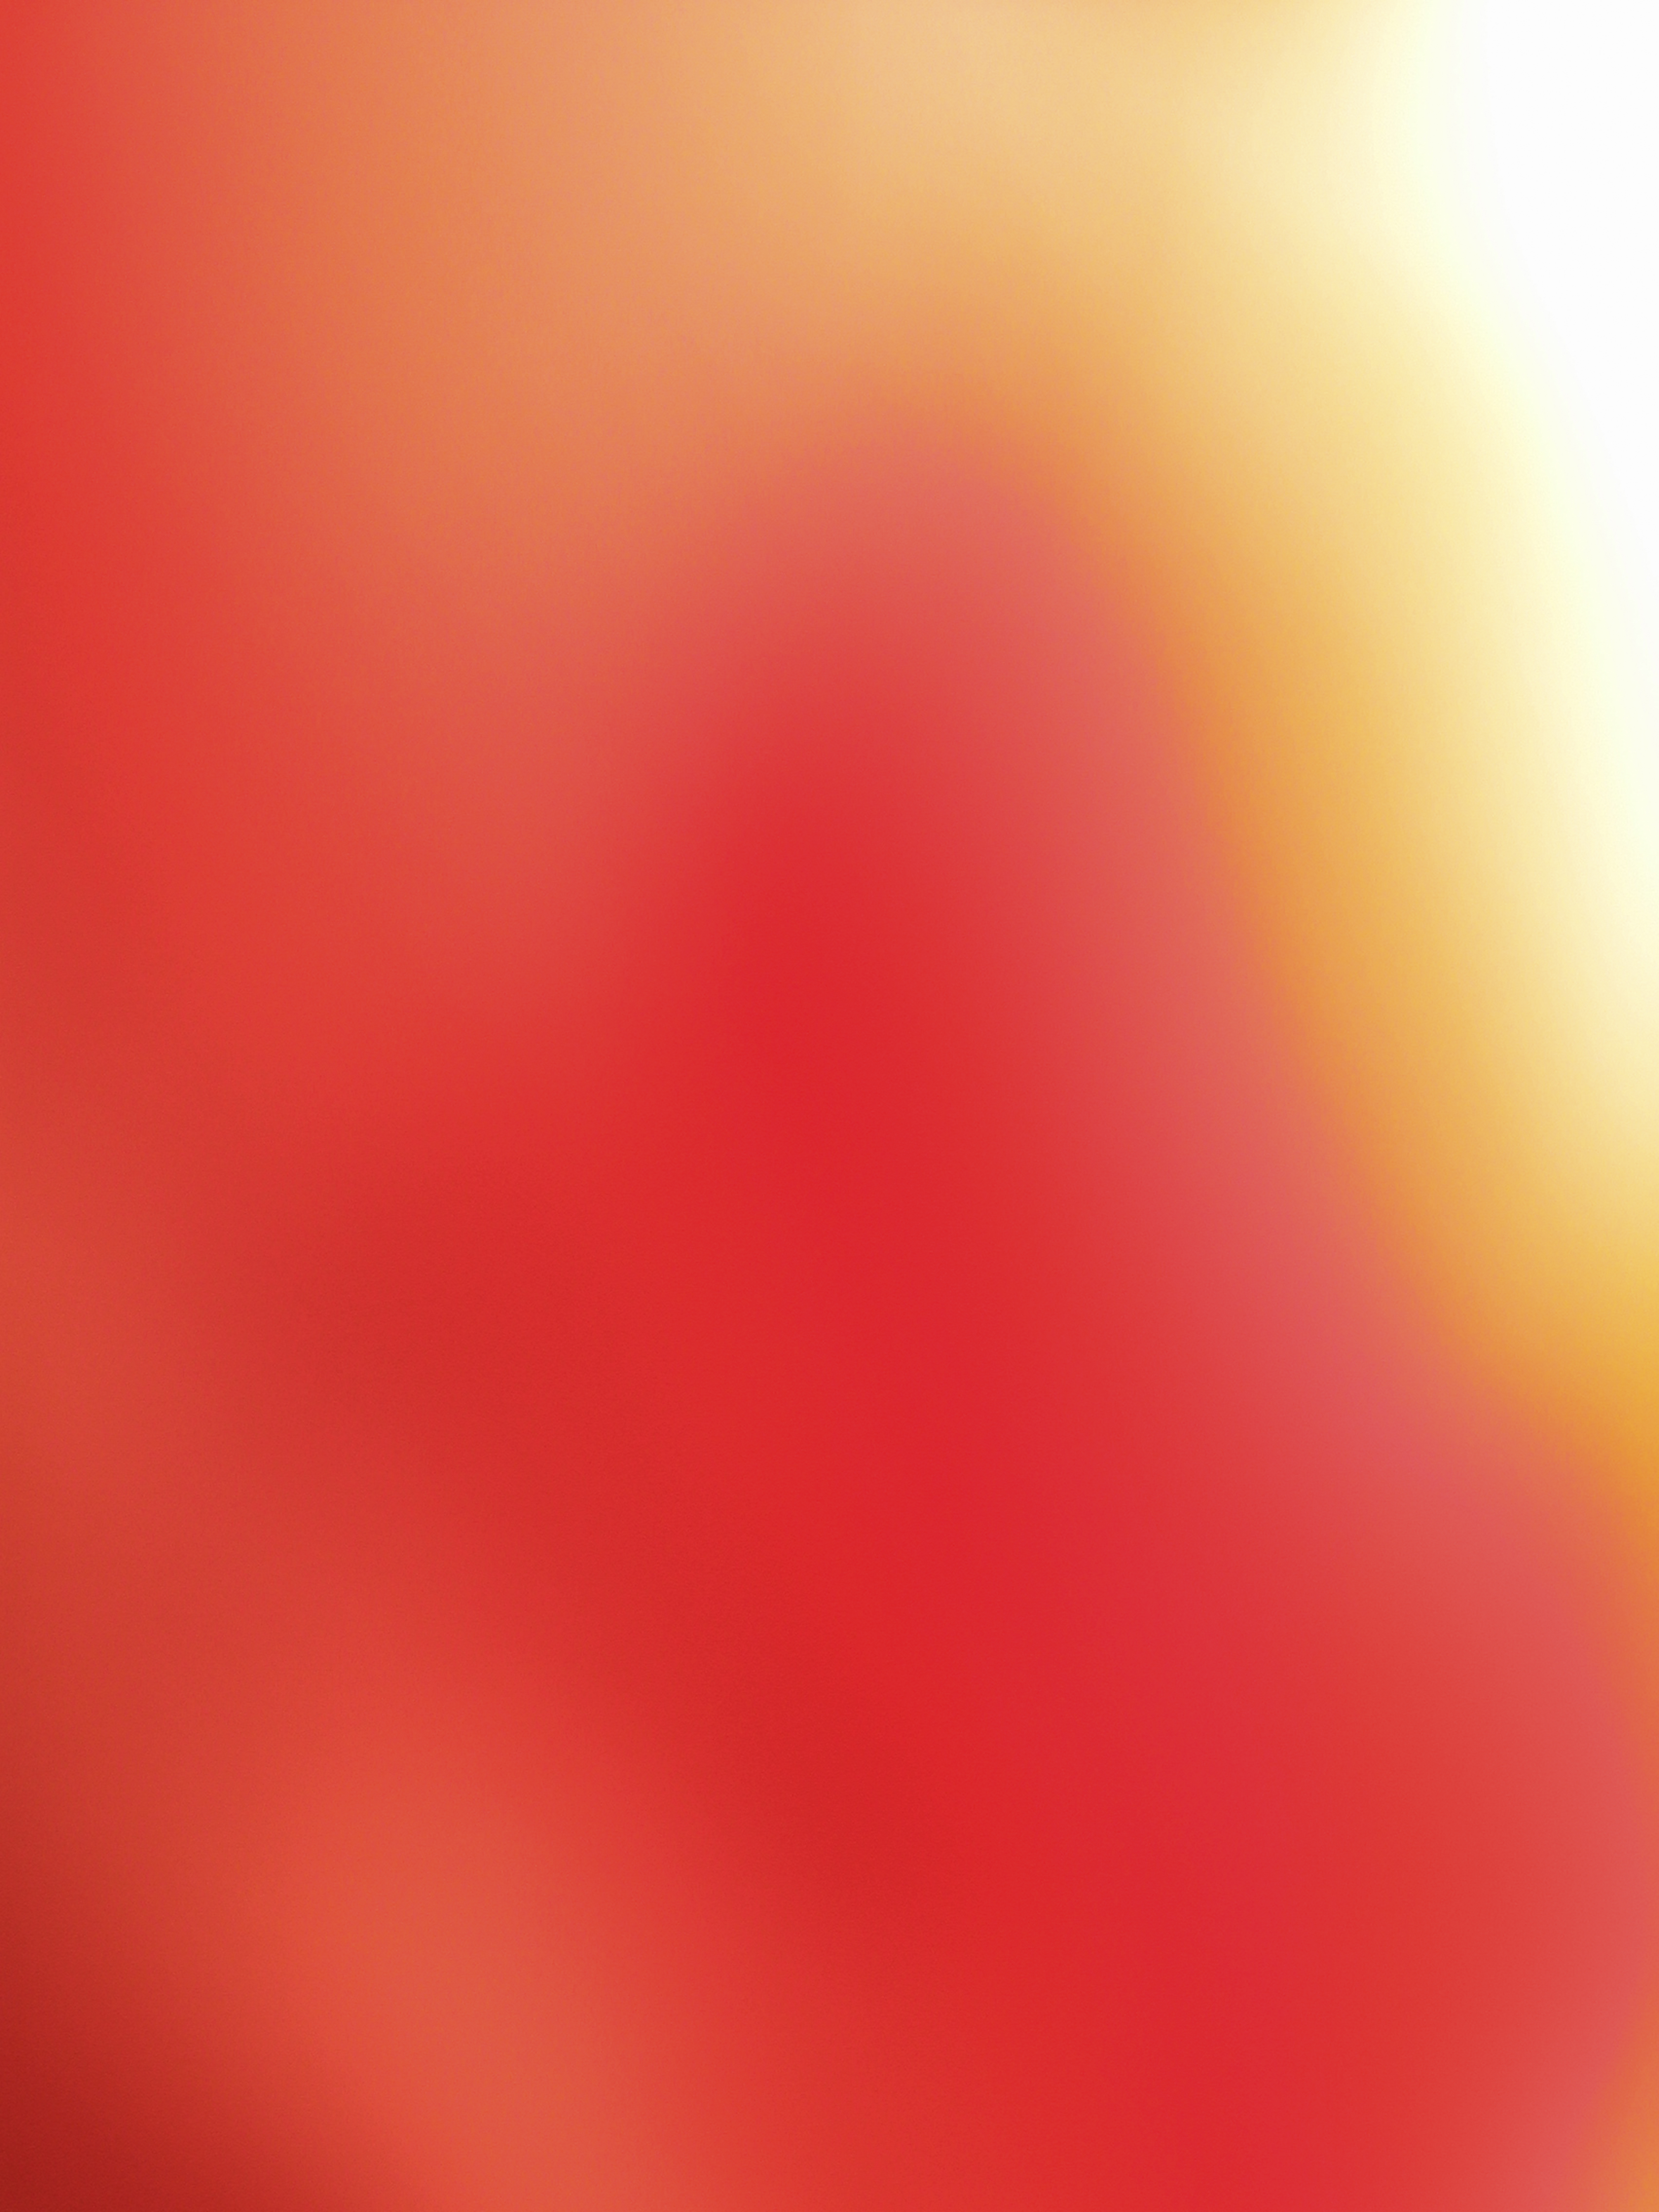 Full HD abstract, gradient, yellow, red